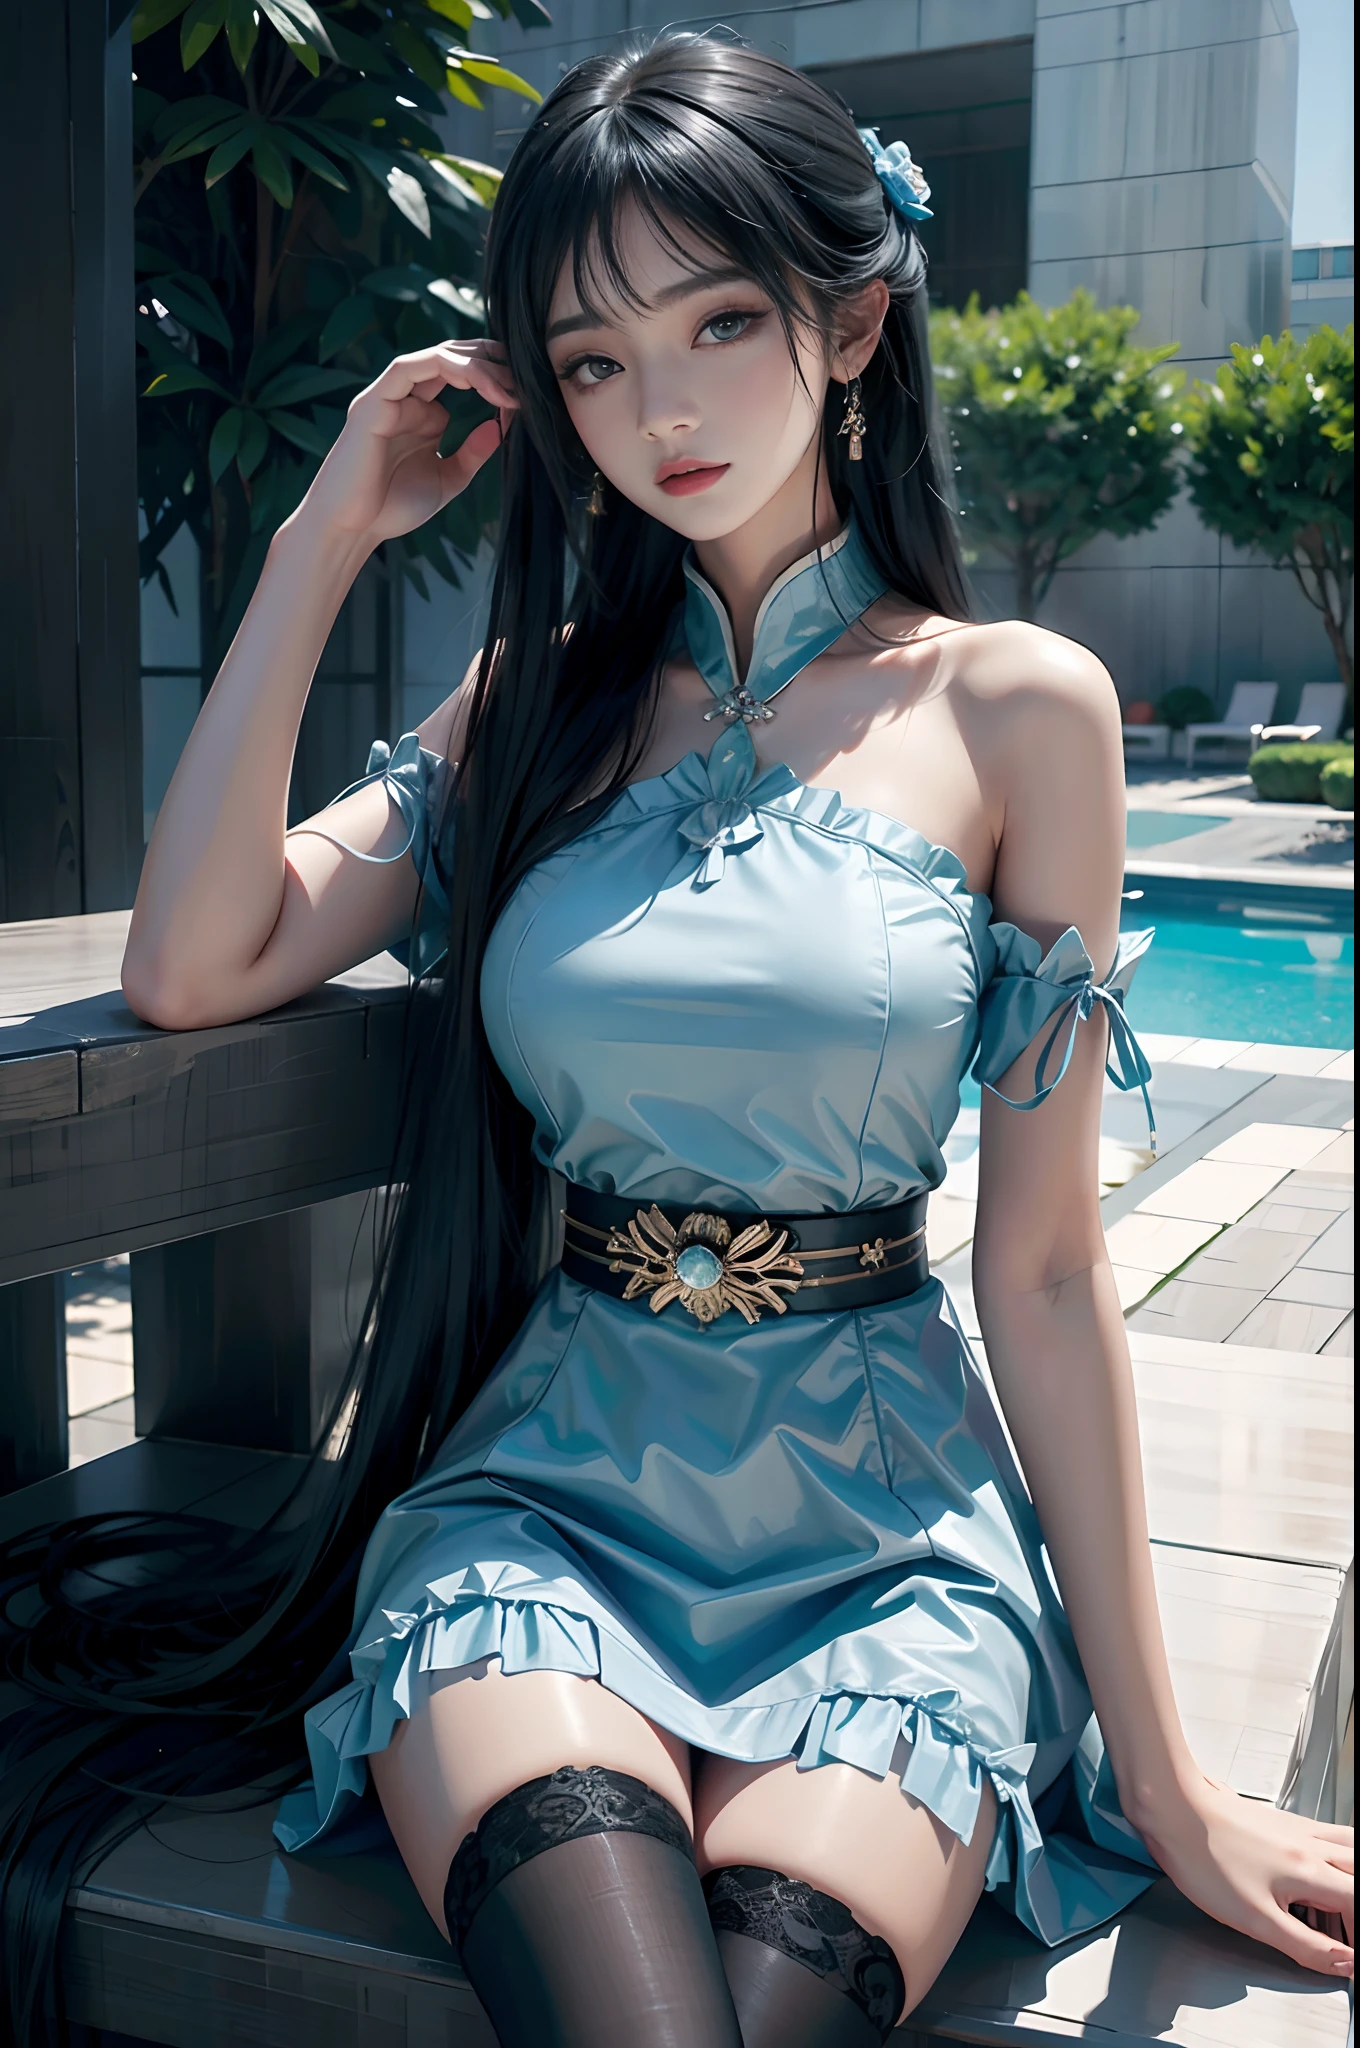 (best qualtiy, 8K, tmasterpiece:1.3)，One hand on the ground, the other ruffling the hair，Sit by the pool with your legs crossed，wearing blue dress，blackstockings，Break through the sky，Xiao Xun'er costume，exquisite facial features，Smoky makeup，lipsticks，Girl in Hanfu,Anime girl cosplay，very pretty girl，1girll。